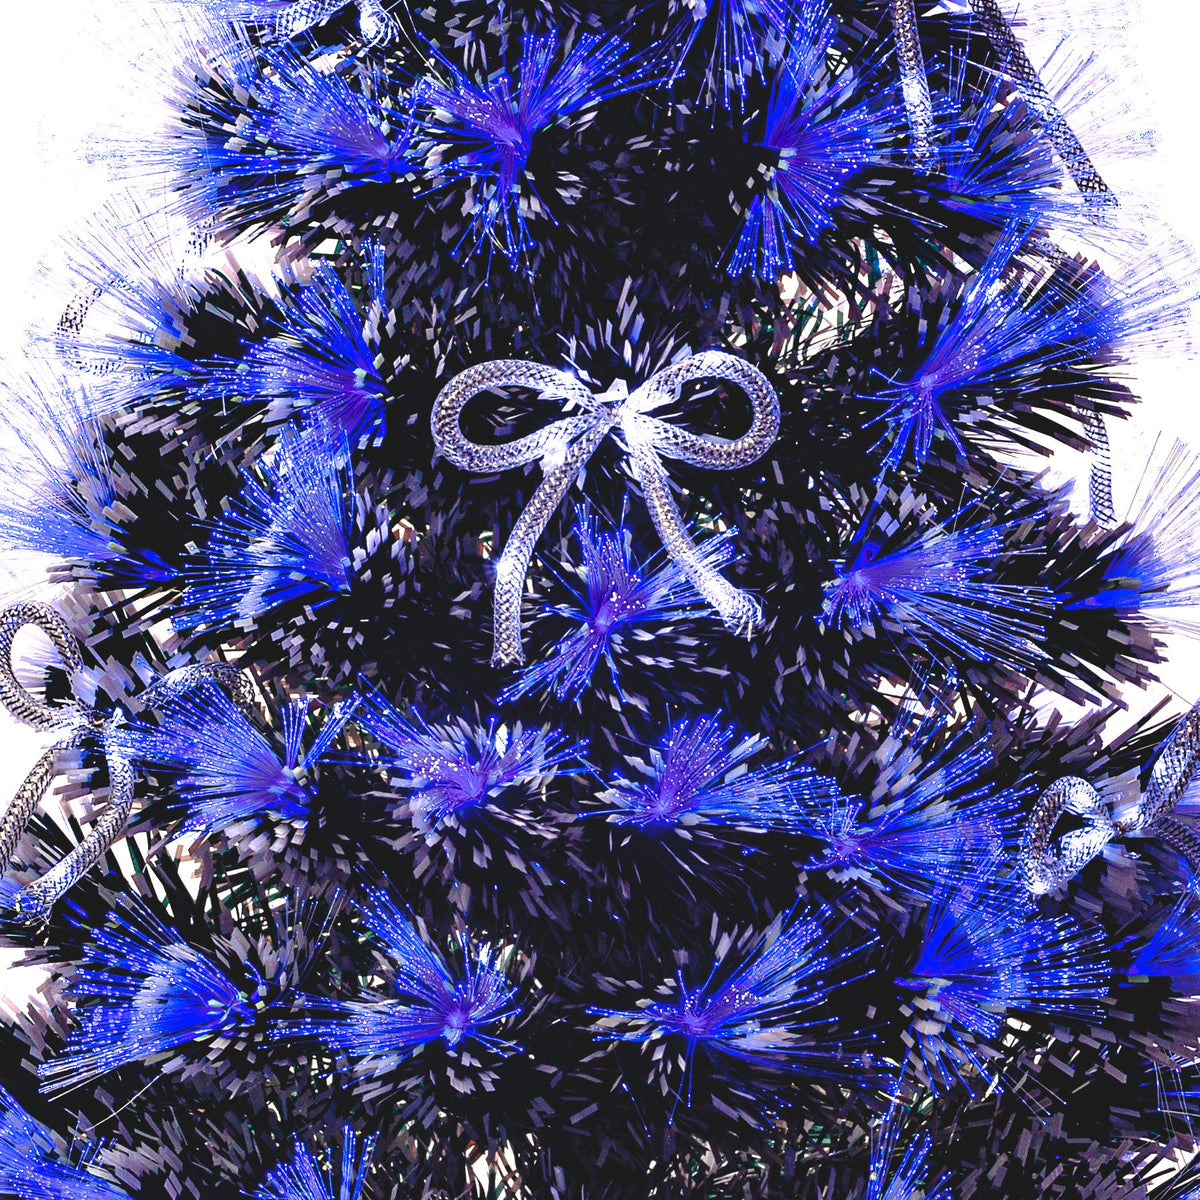 White Tipped Green Fibre Optic Christmas Tree 2ft to 7ft with Blue LED Lights and White Bows